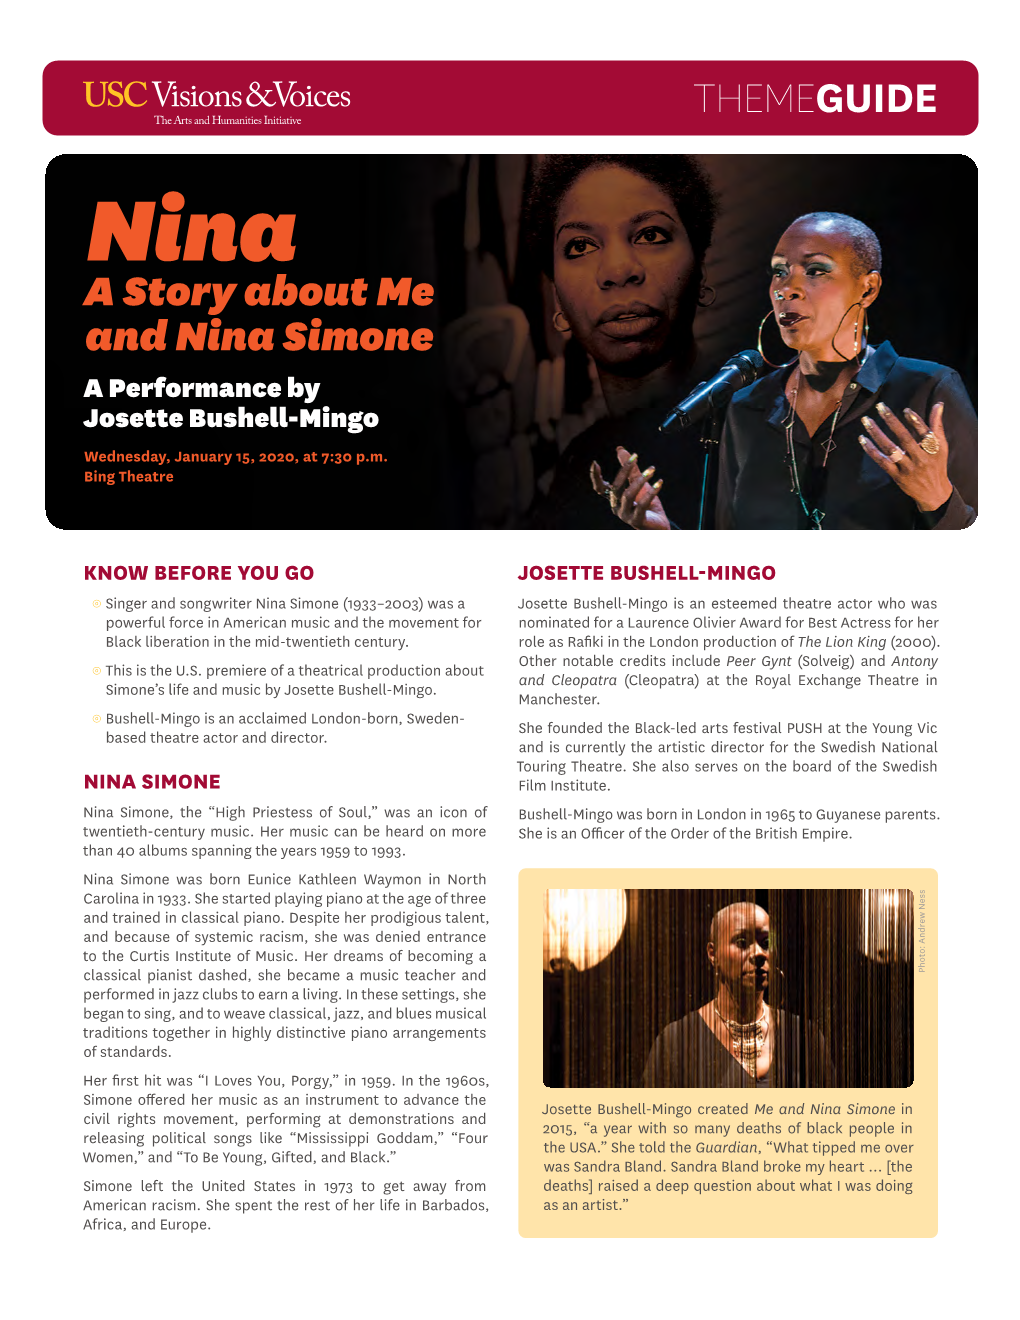 THEMEGUIDE a Story About Me and Nina Simone